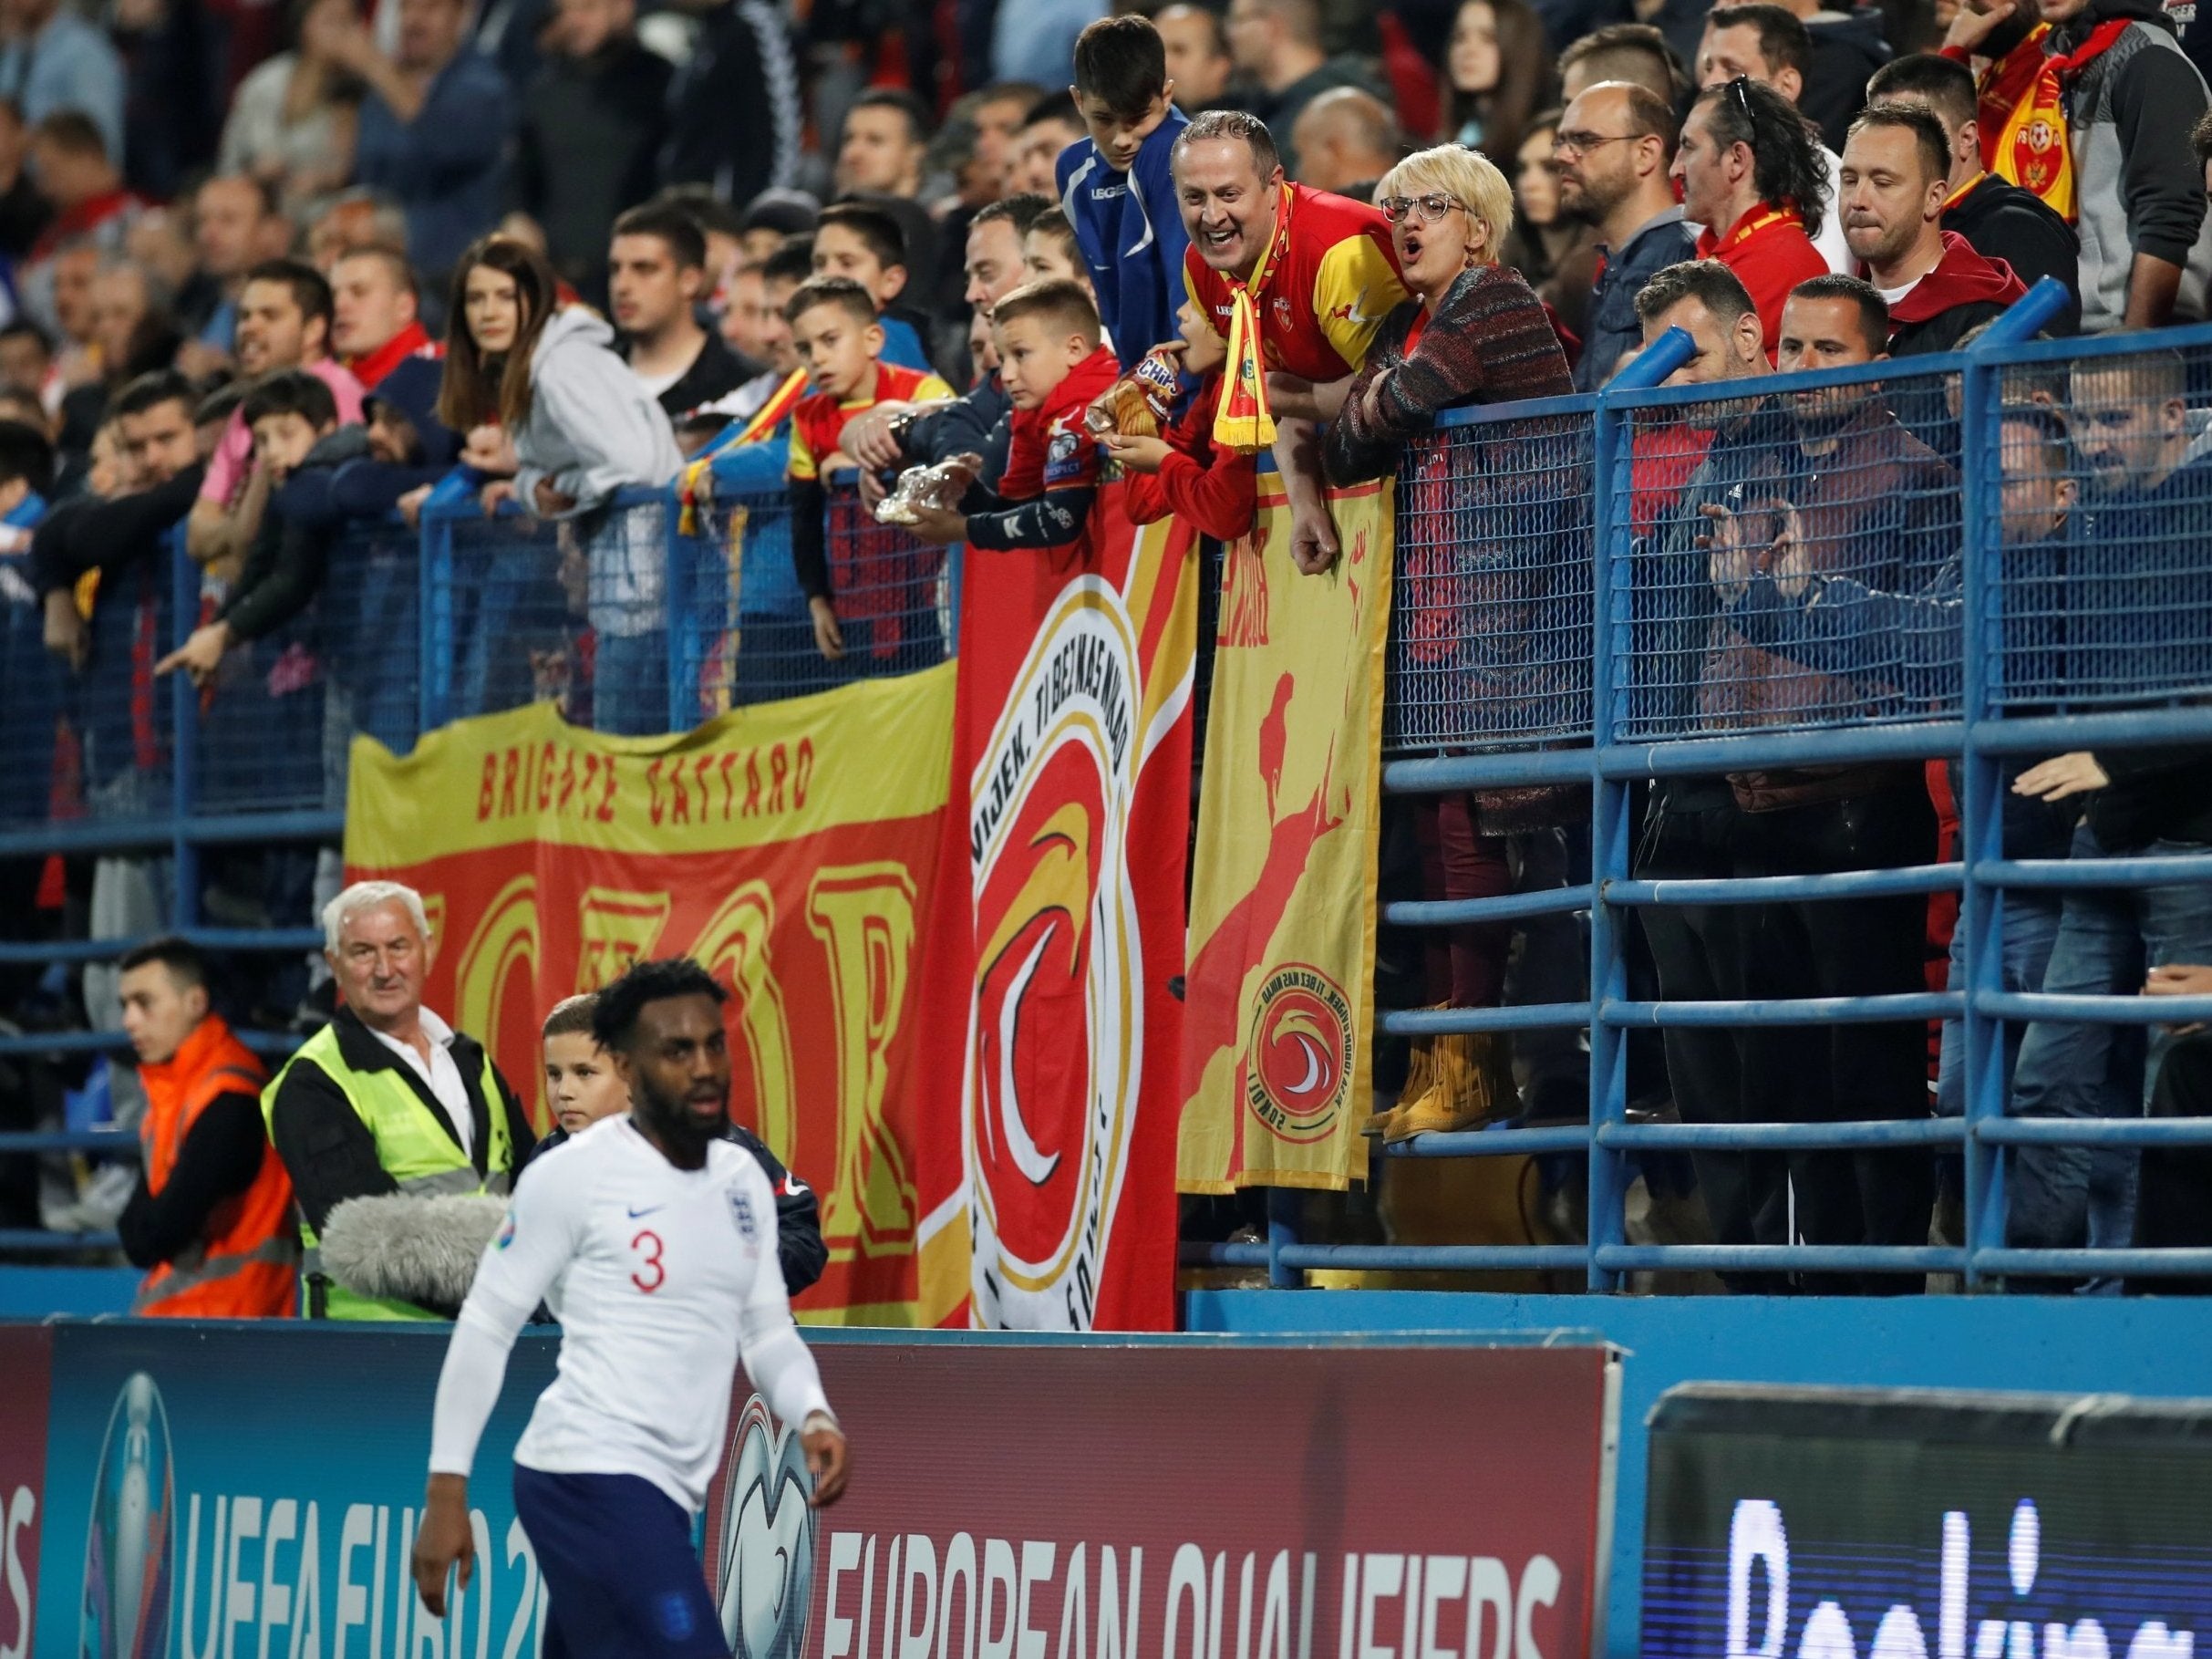 A number of England players were racially abused in Montenegro